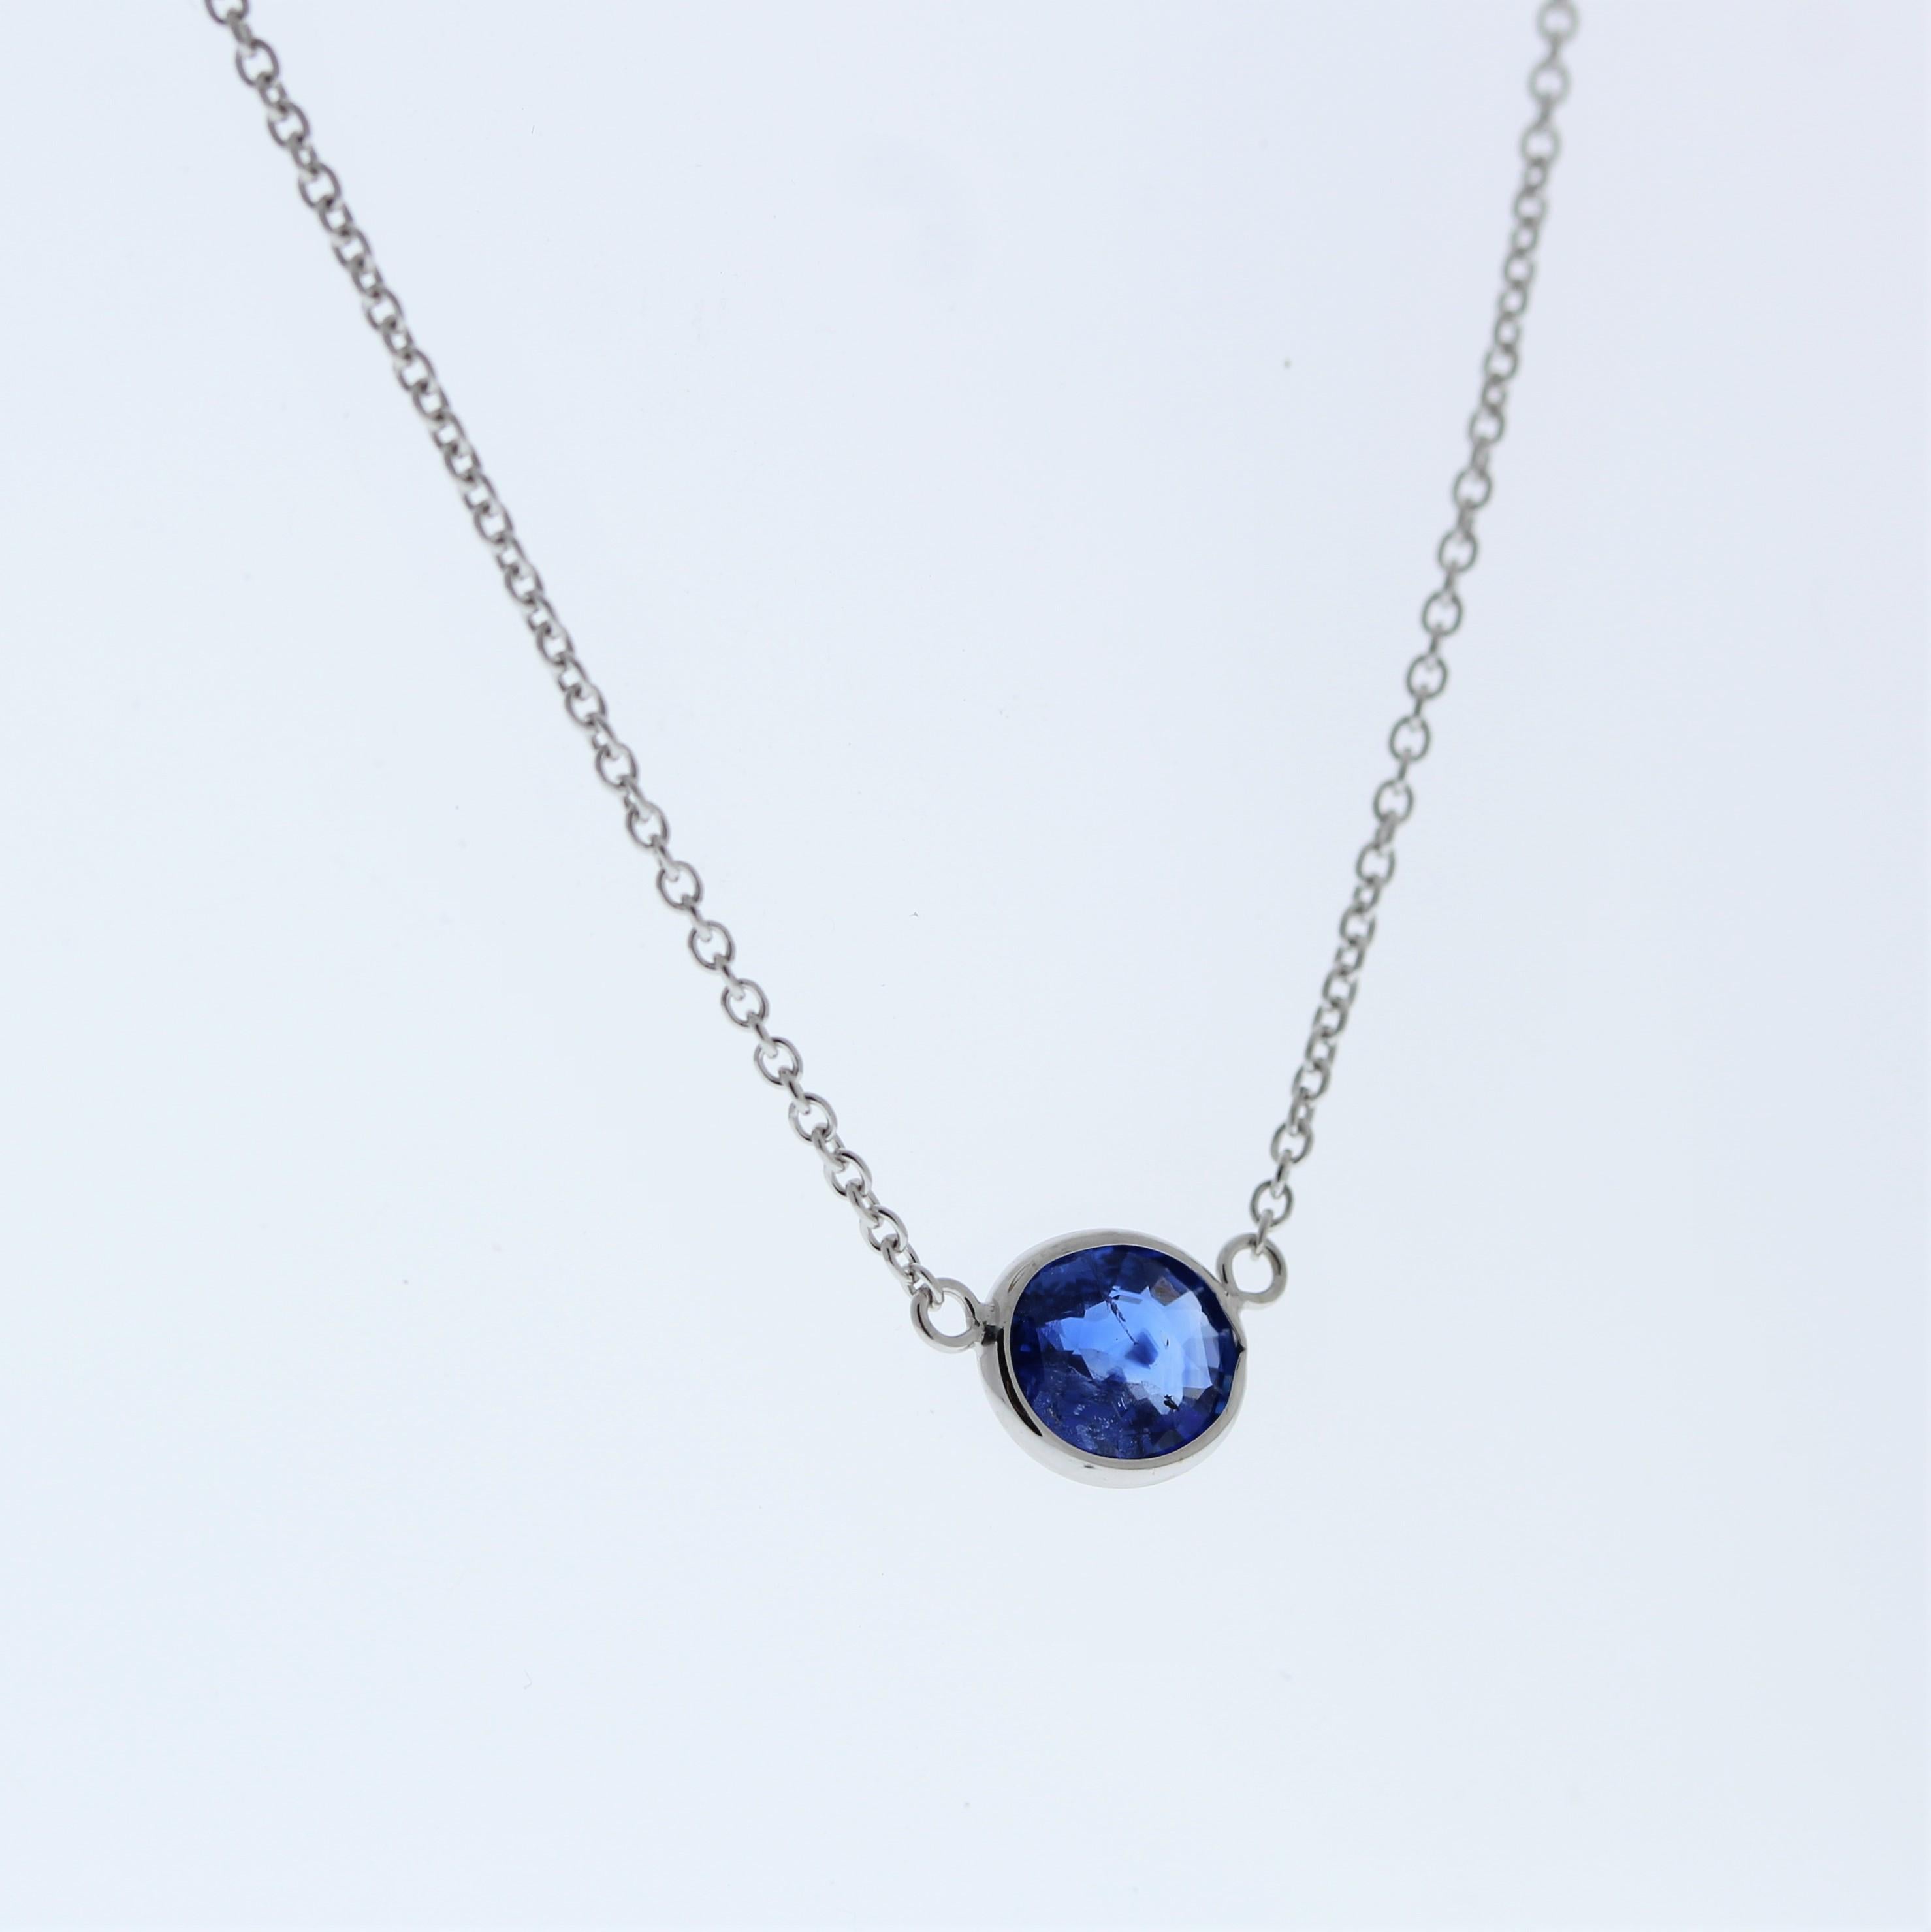 The necklace features a 1.18-carat oval-cut blue sapphire set in a 14 karat white gold pendant or setting. The oval cut and the blue sapphire's color against the white gold setting are likely to create an elegant and versatile fashion piece that